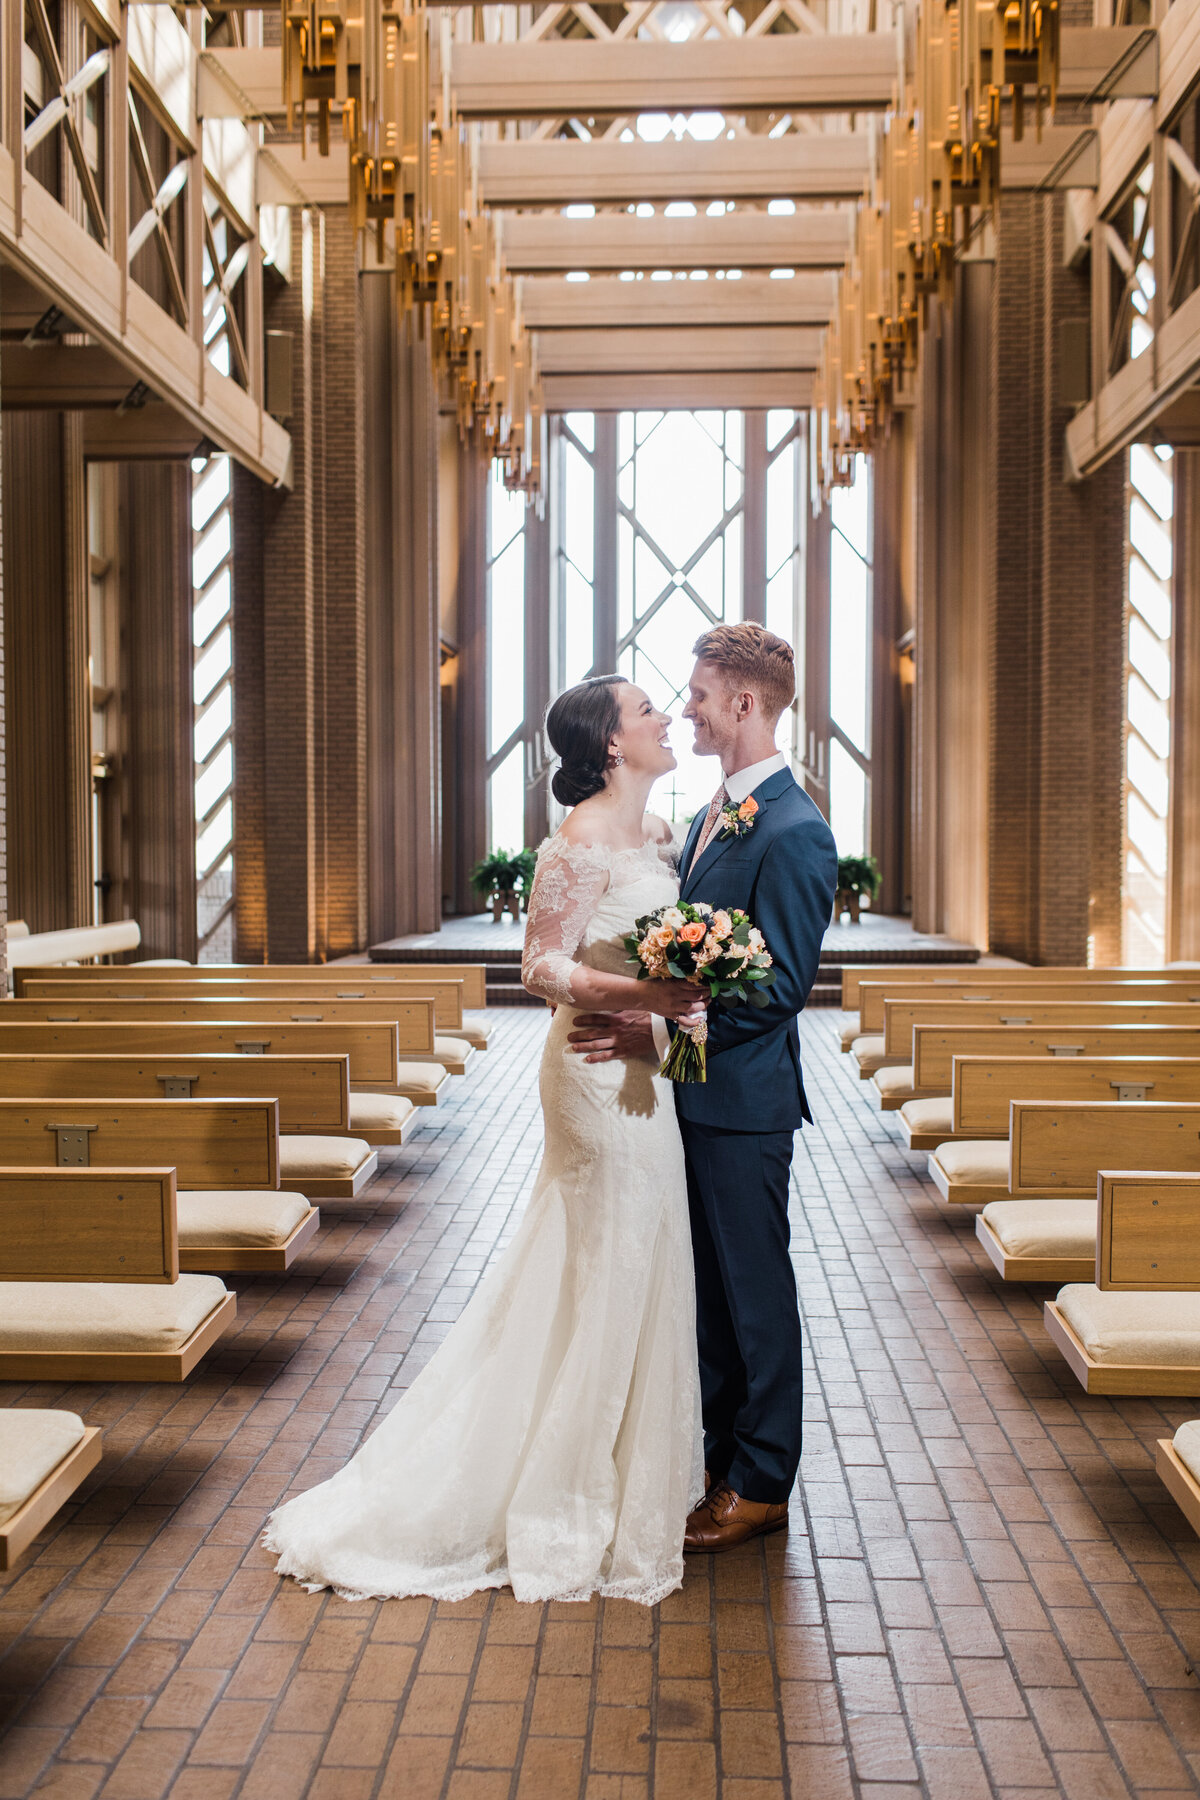 A portrait of a bride and groom holding each other close and smiling in the chapel portion of the Marty Leonard Community Chapel in Fort Worth, Texas. The bride is on the left and is wearing a long sleeve, intricate, white dress and is holding a bouquet. The groom is on the right and is wearing a blue suit with a boutonniere.